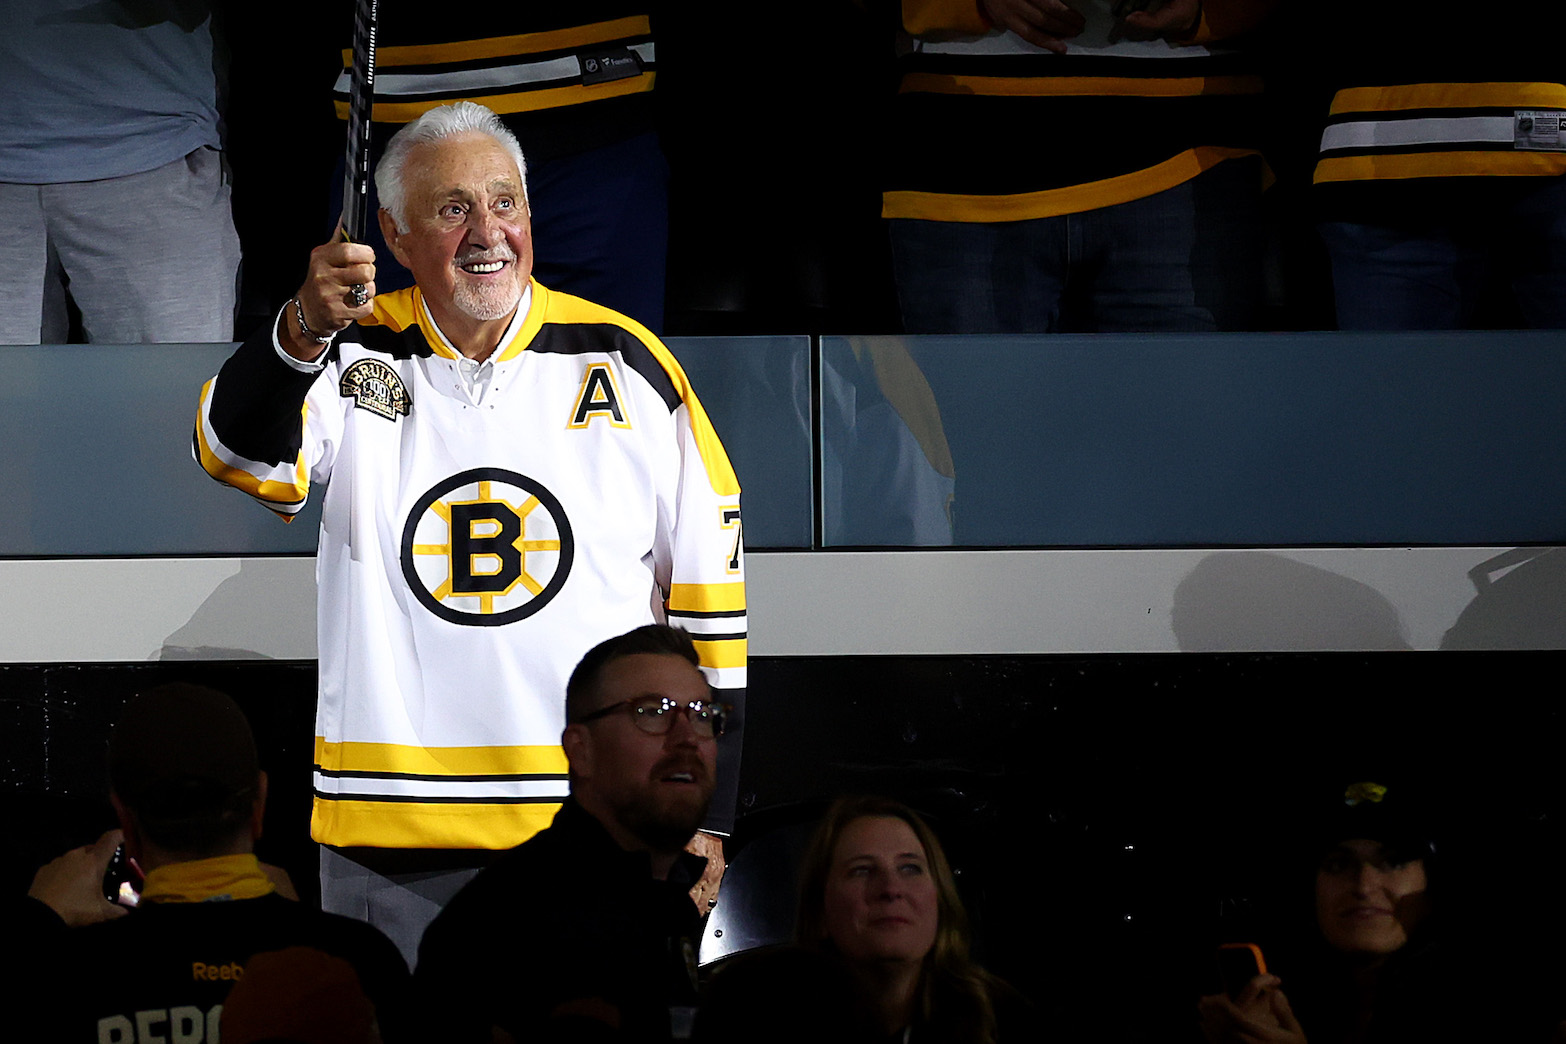 BOSTON, MASSACHUSETTS - OCTOBER 11: Former Boston Bruins player Phil Esposito waves to the crowd ahead of the Bruins home opener against the Chicago Blackhawks at TD Garden on October 11, 2023 in Boston, Massachusetts. (Photo by Maddie Meyer/Getty Images)